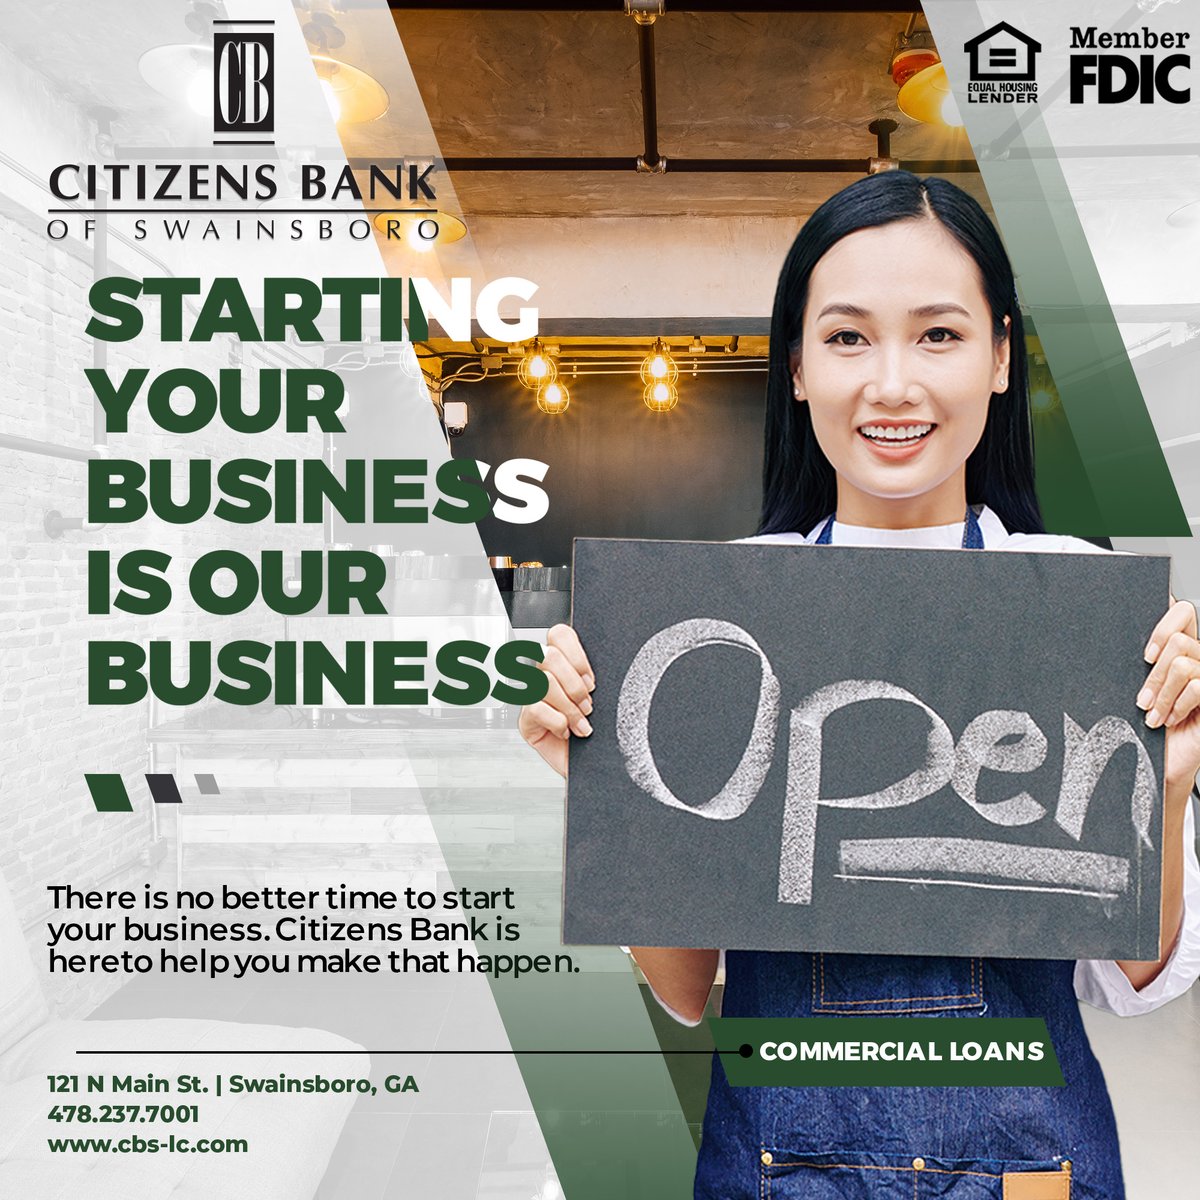 Are you ready to take the next step in your small business adventure?

Let us help get you started with a small business loan today, because “small business is our business!”

#SmallBusinessLoan #CitizensBankSwainsboro